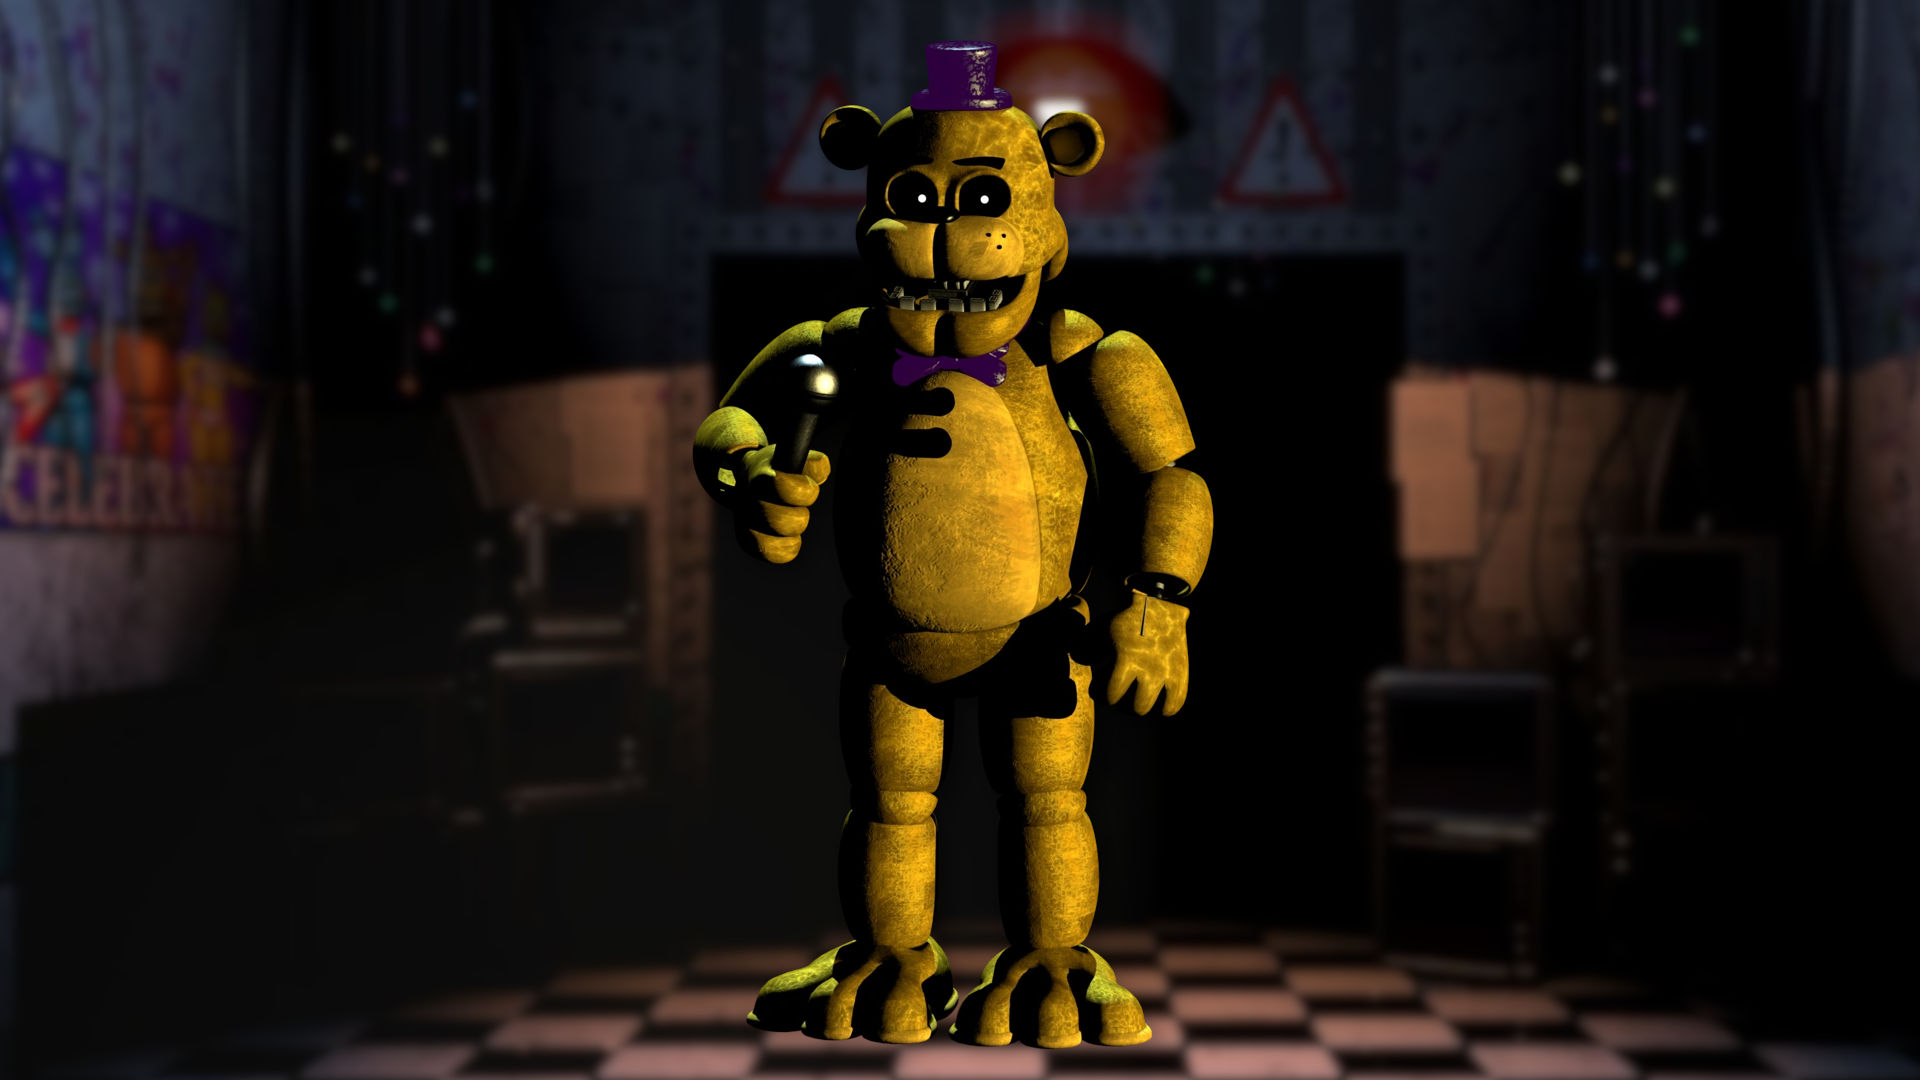 If Golden Freddy was more important in FNAF 1, how would you